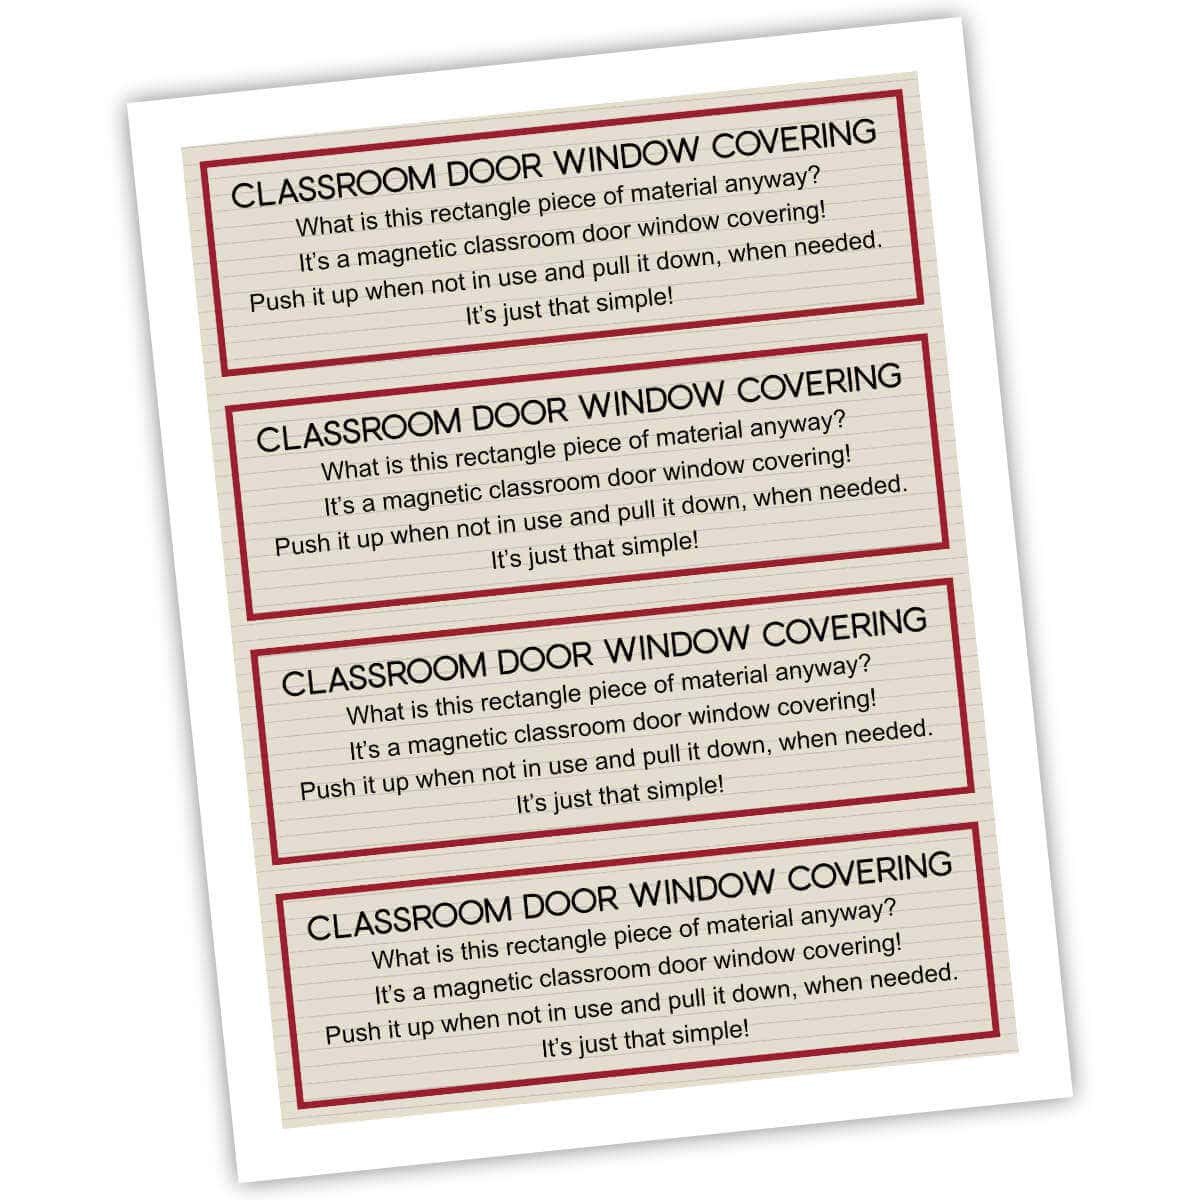 Classroom door window covering printable tag that tells what it's for.